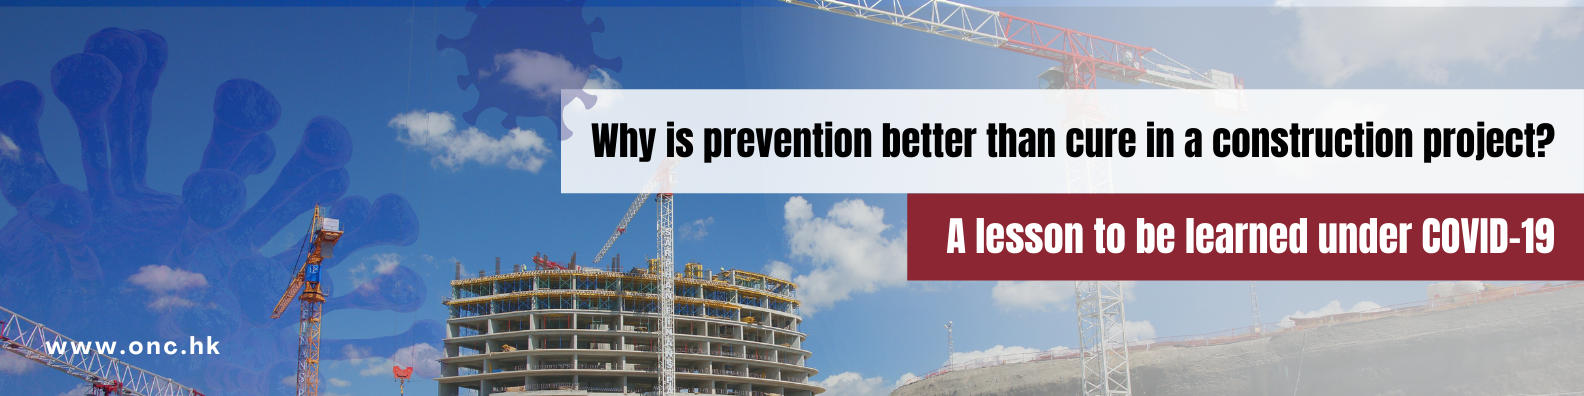 Why is prevention better than cure in a construction project?  A lesson to be learned under COVID-19